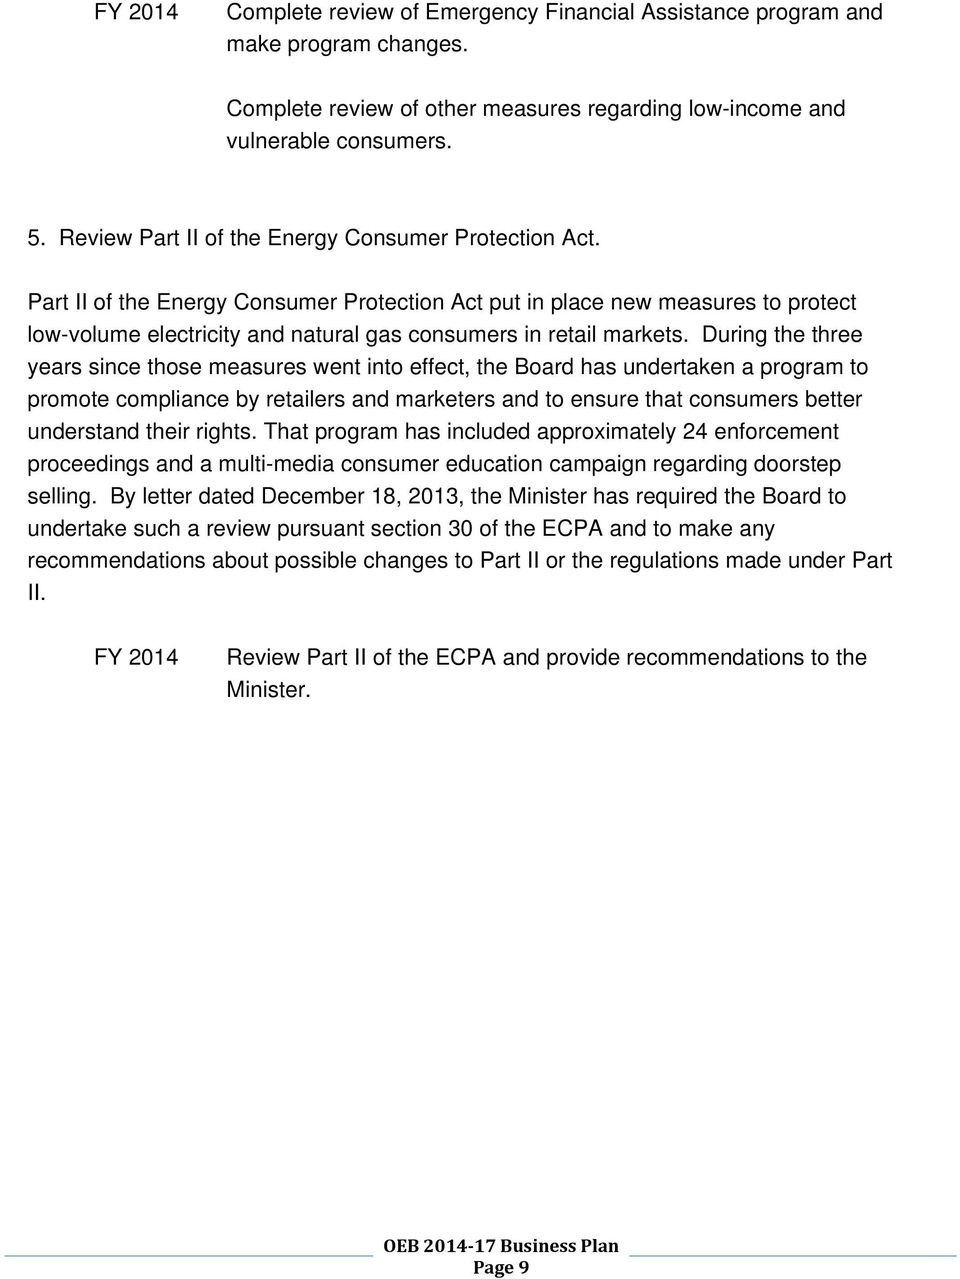 Part II of the Energy Consumer Protection Act put in place new measures to protect low-volume electricity and natural gas consumers in retail markets.